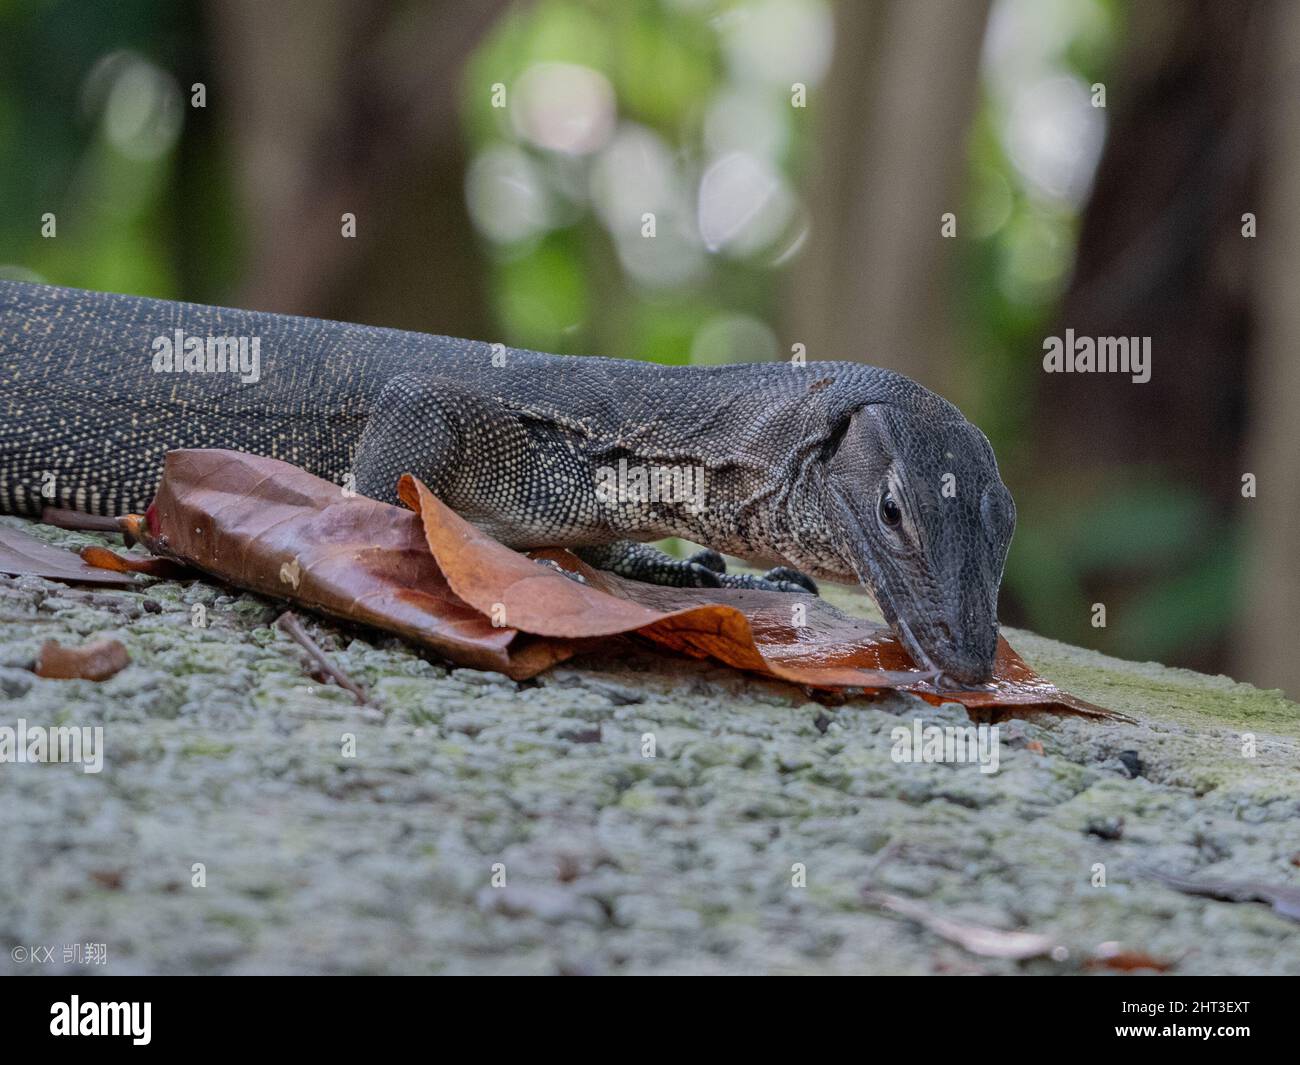 Photo of a Lizard in the wild Stock Photo